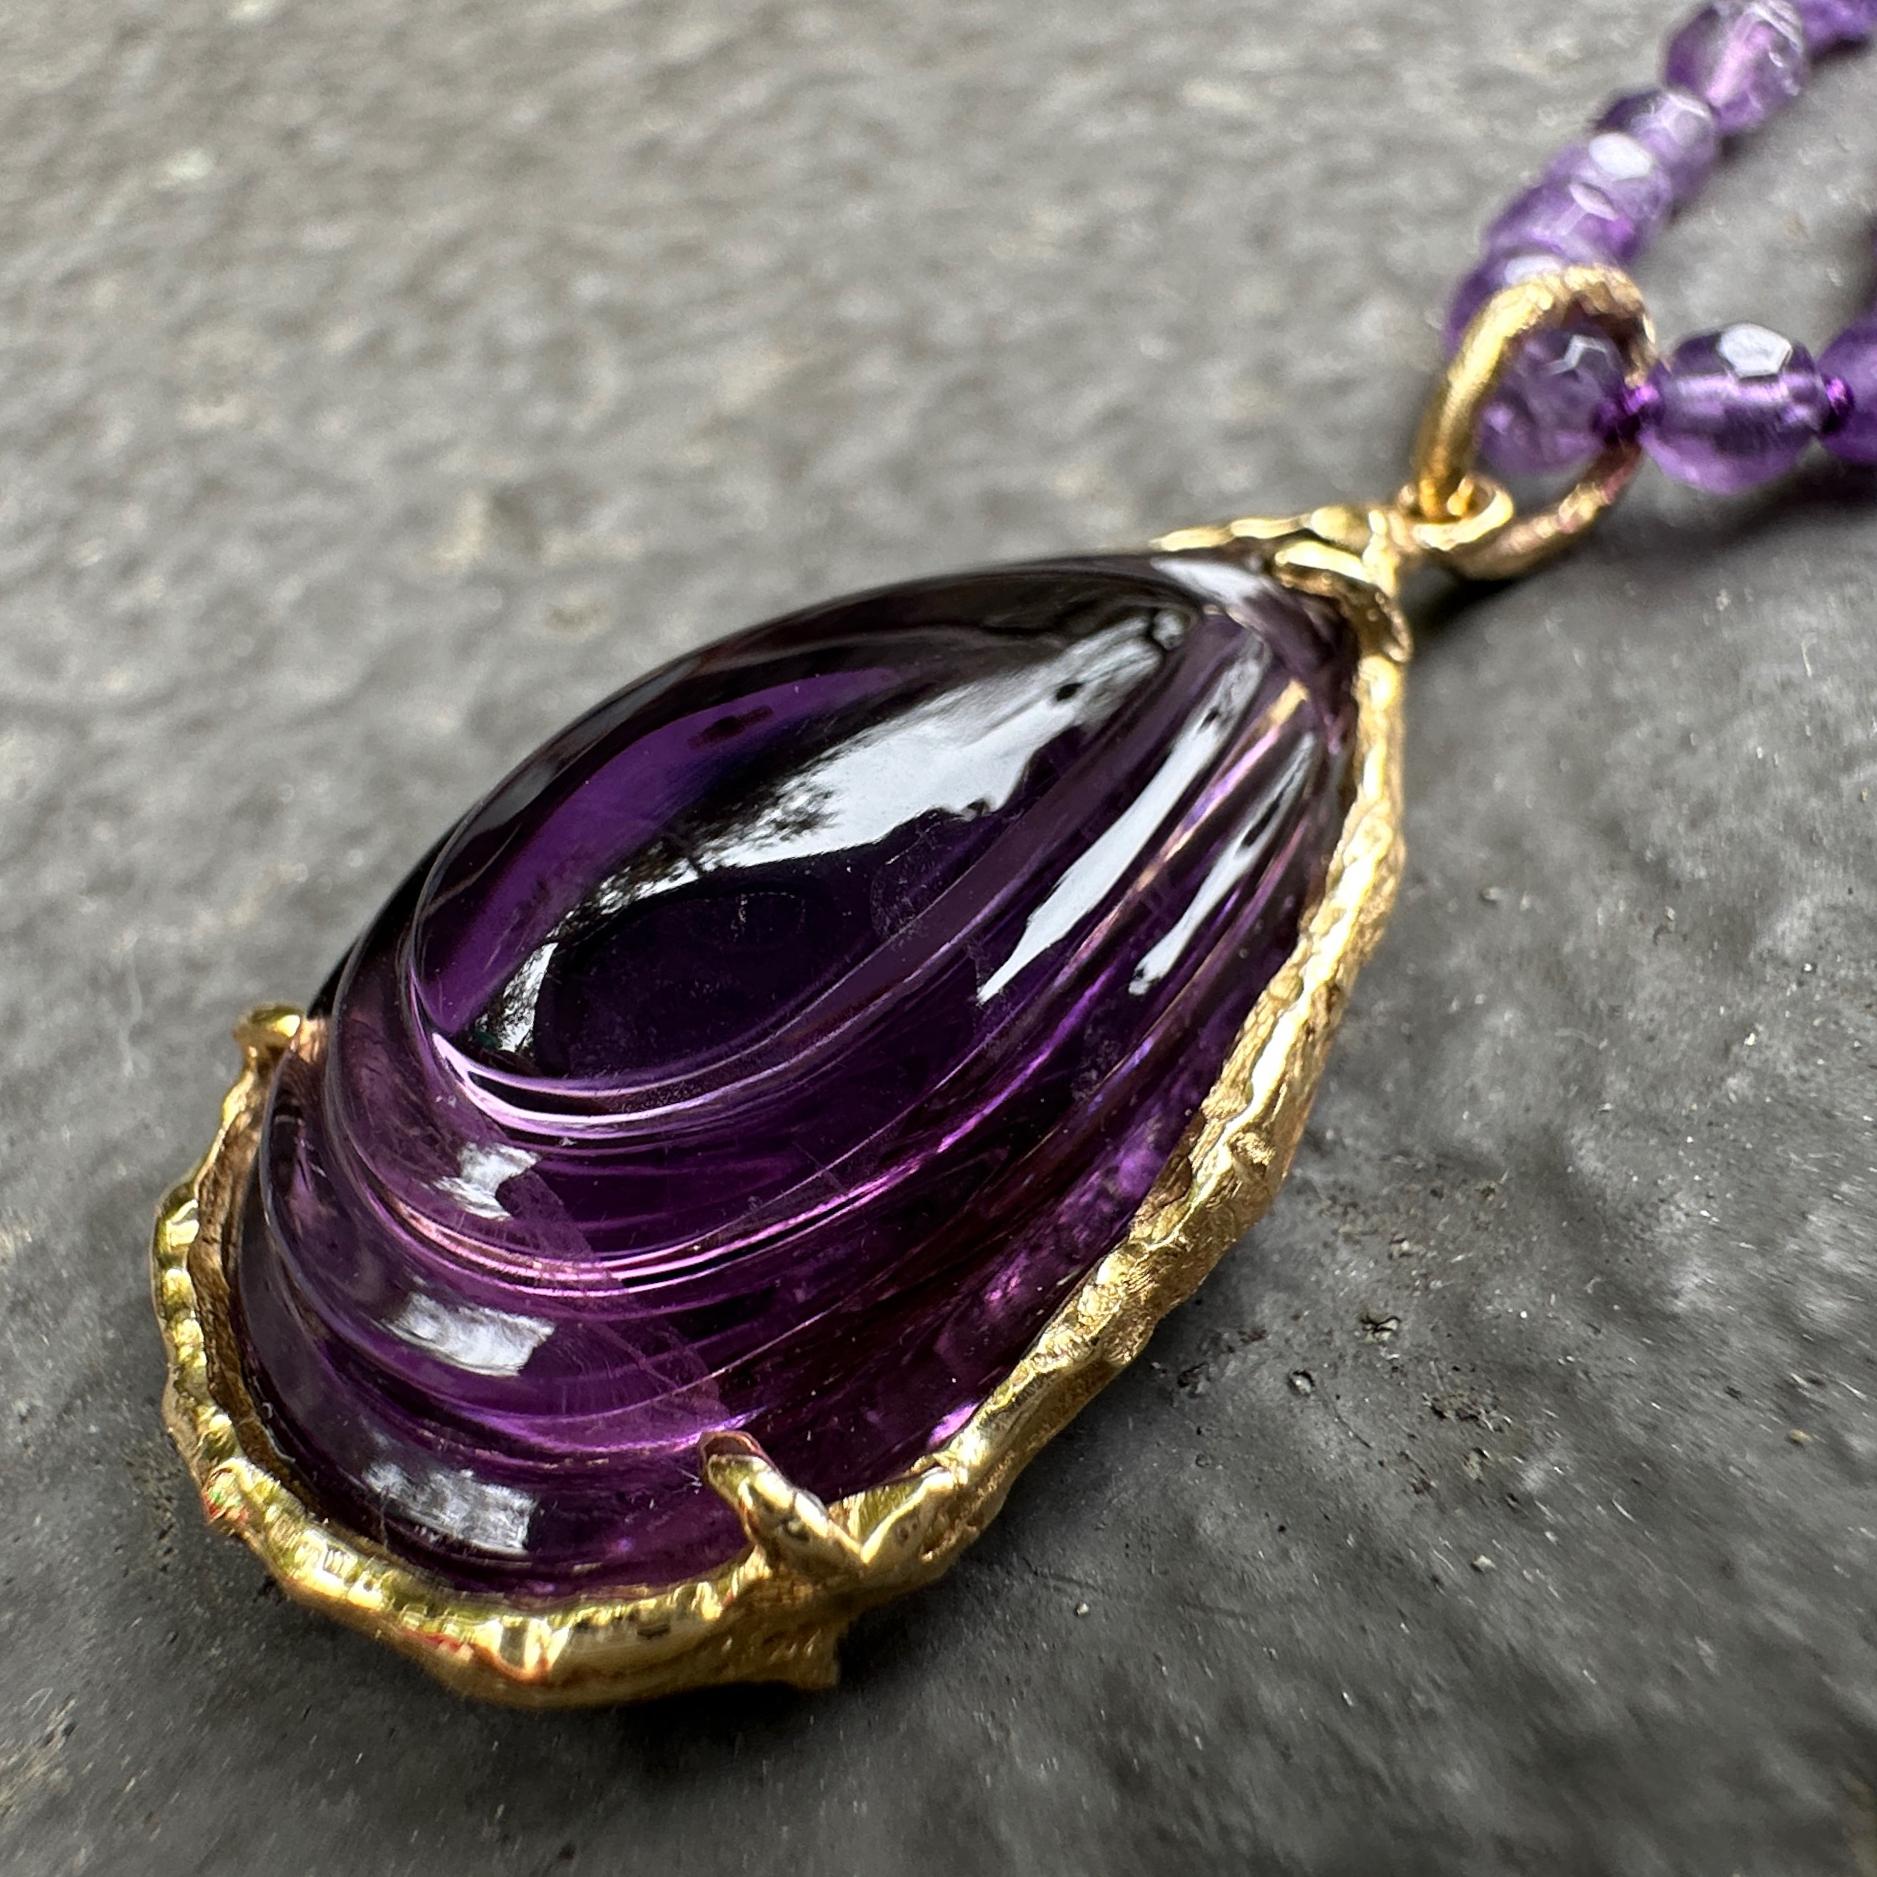 39 Carat Carved Amethyst Pendant in 18K Gold on Convertible Amethyst Bead Chain For Sale 4